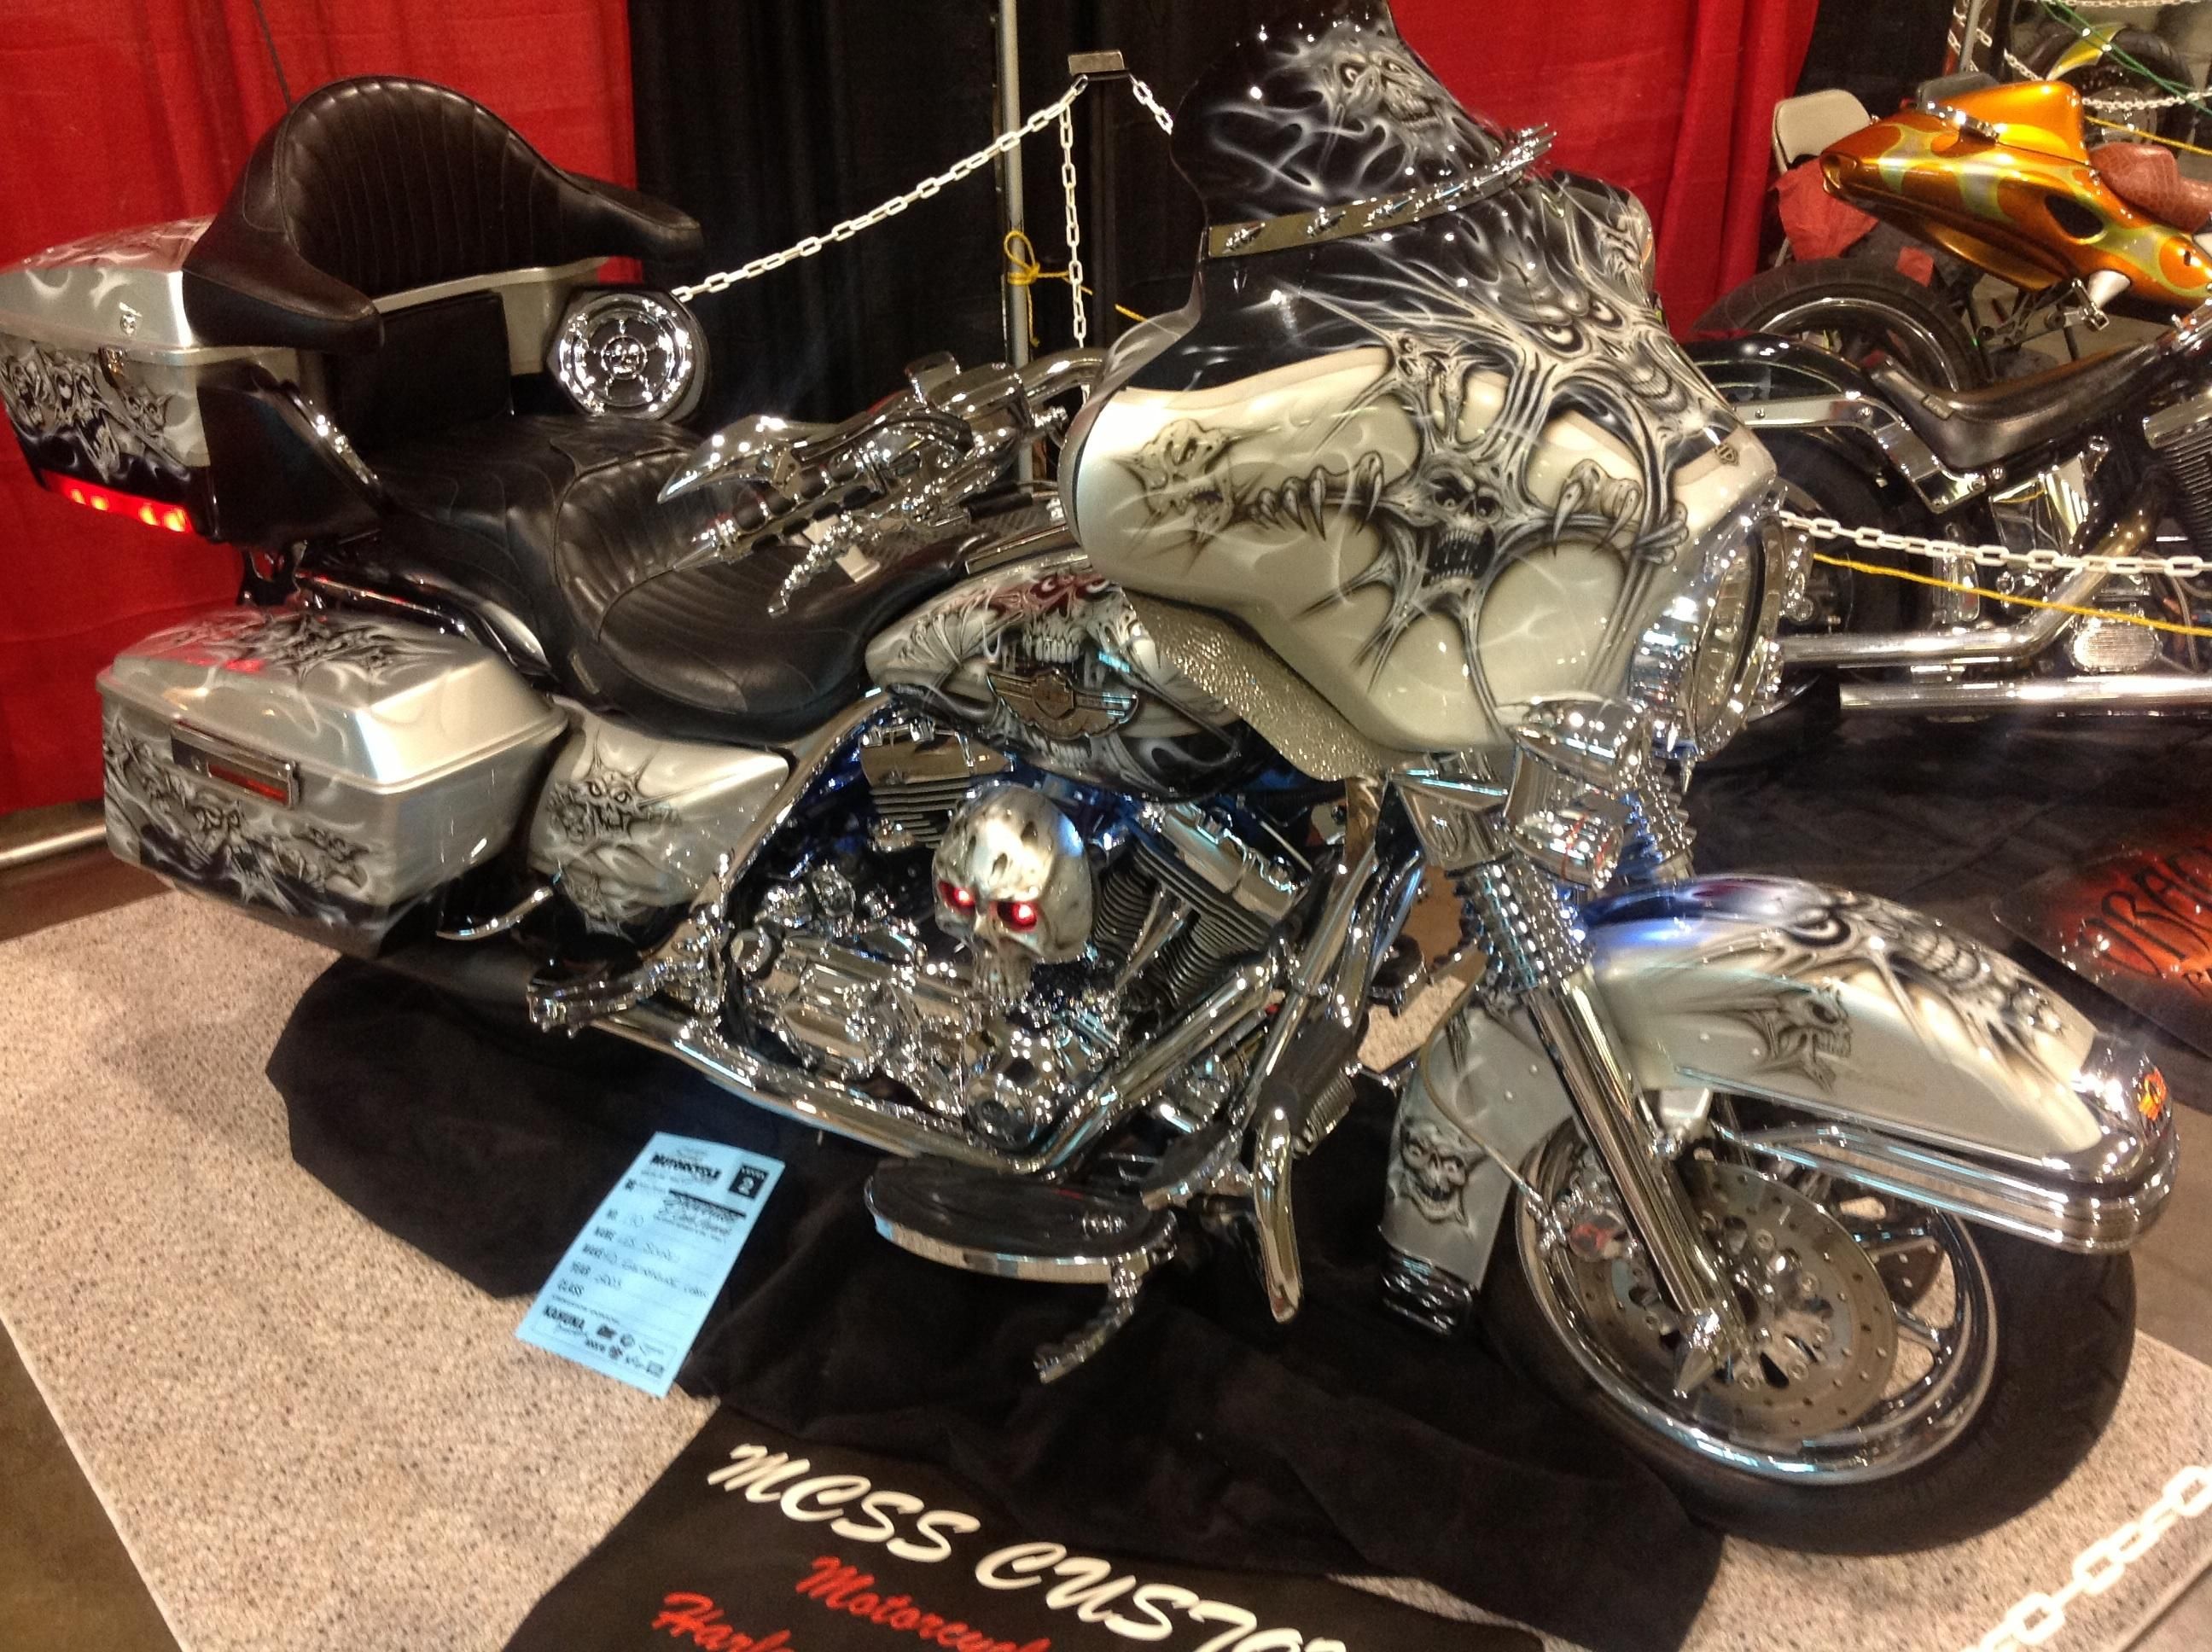 HD Electraglide at Spring Motorcycle Show